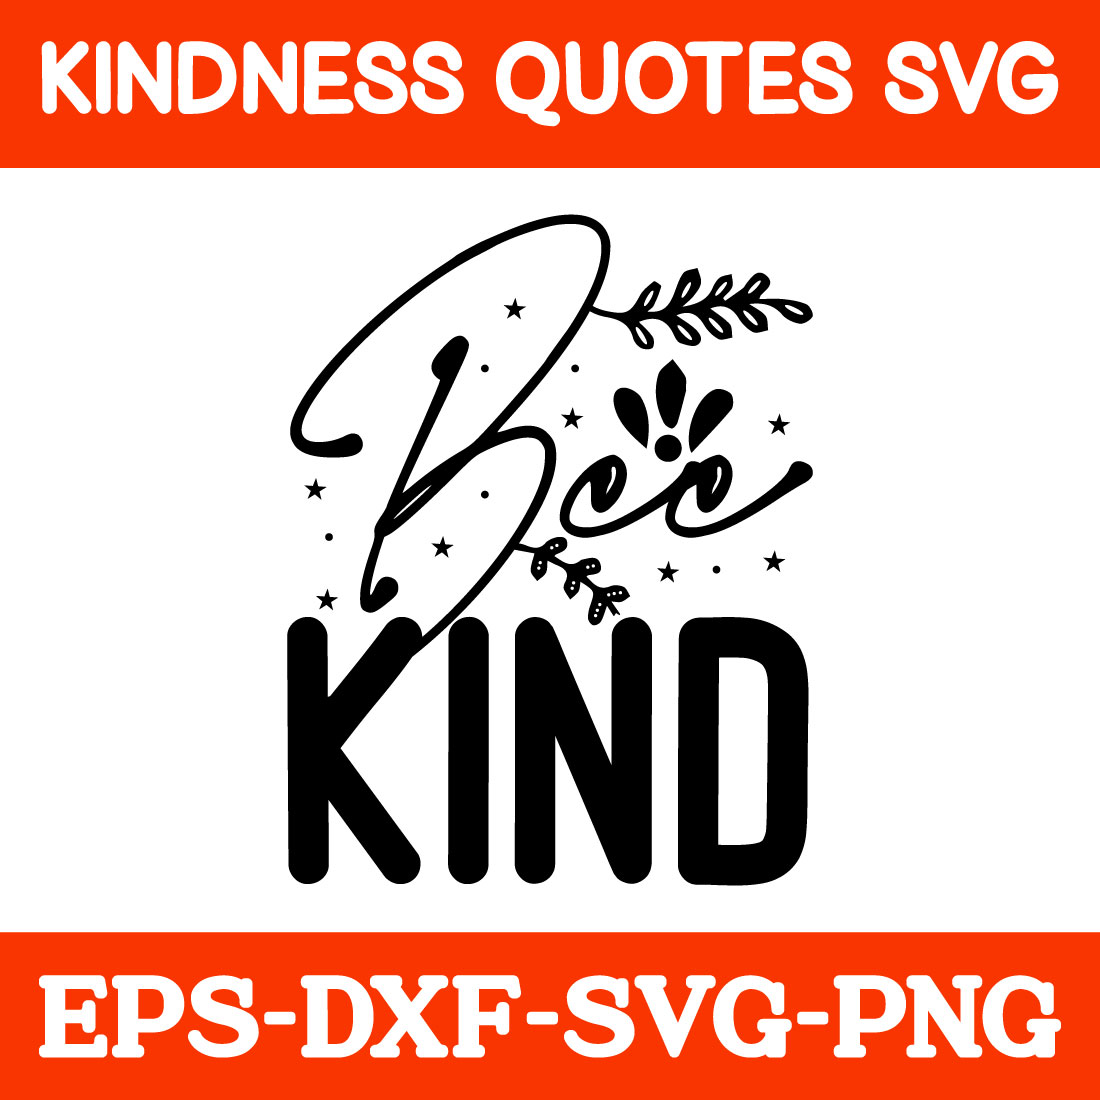 Kindness Quotes Svg Free preview image.